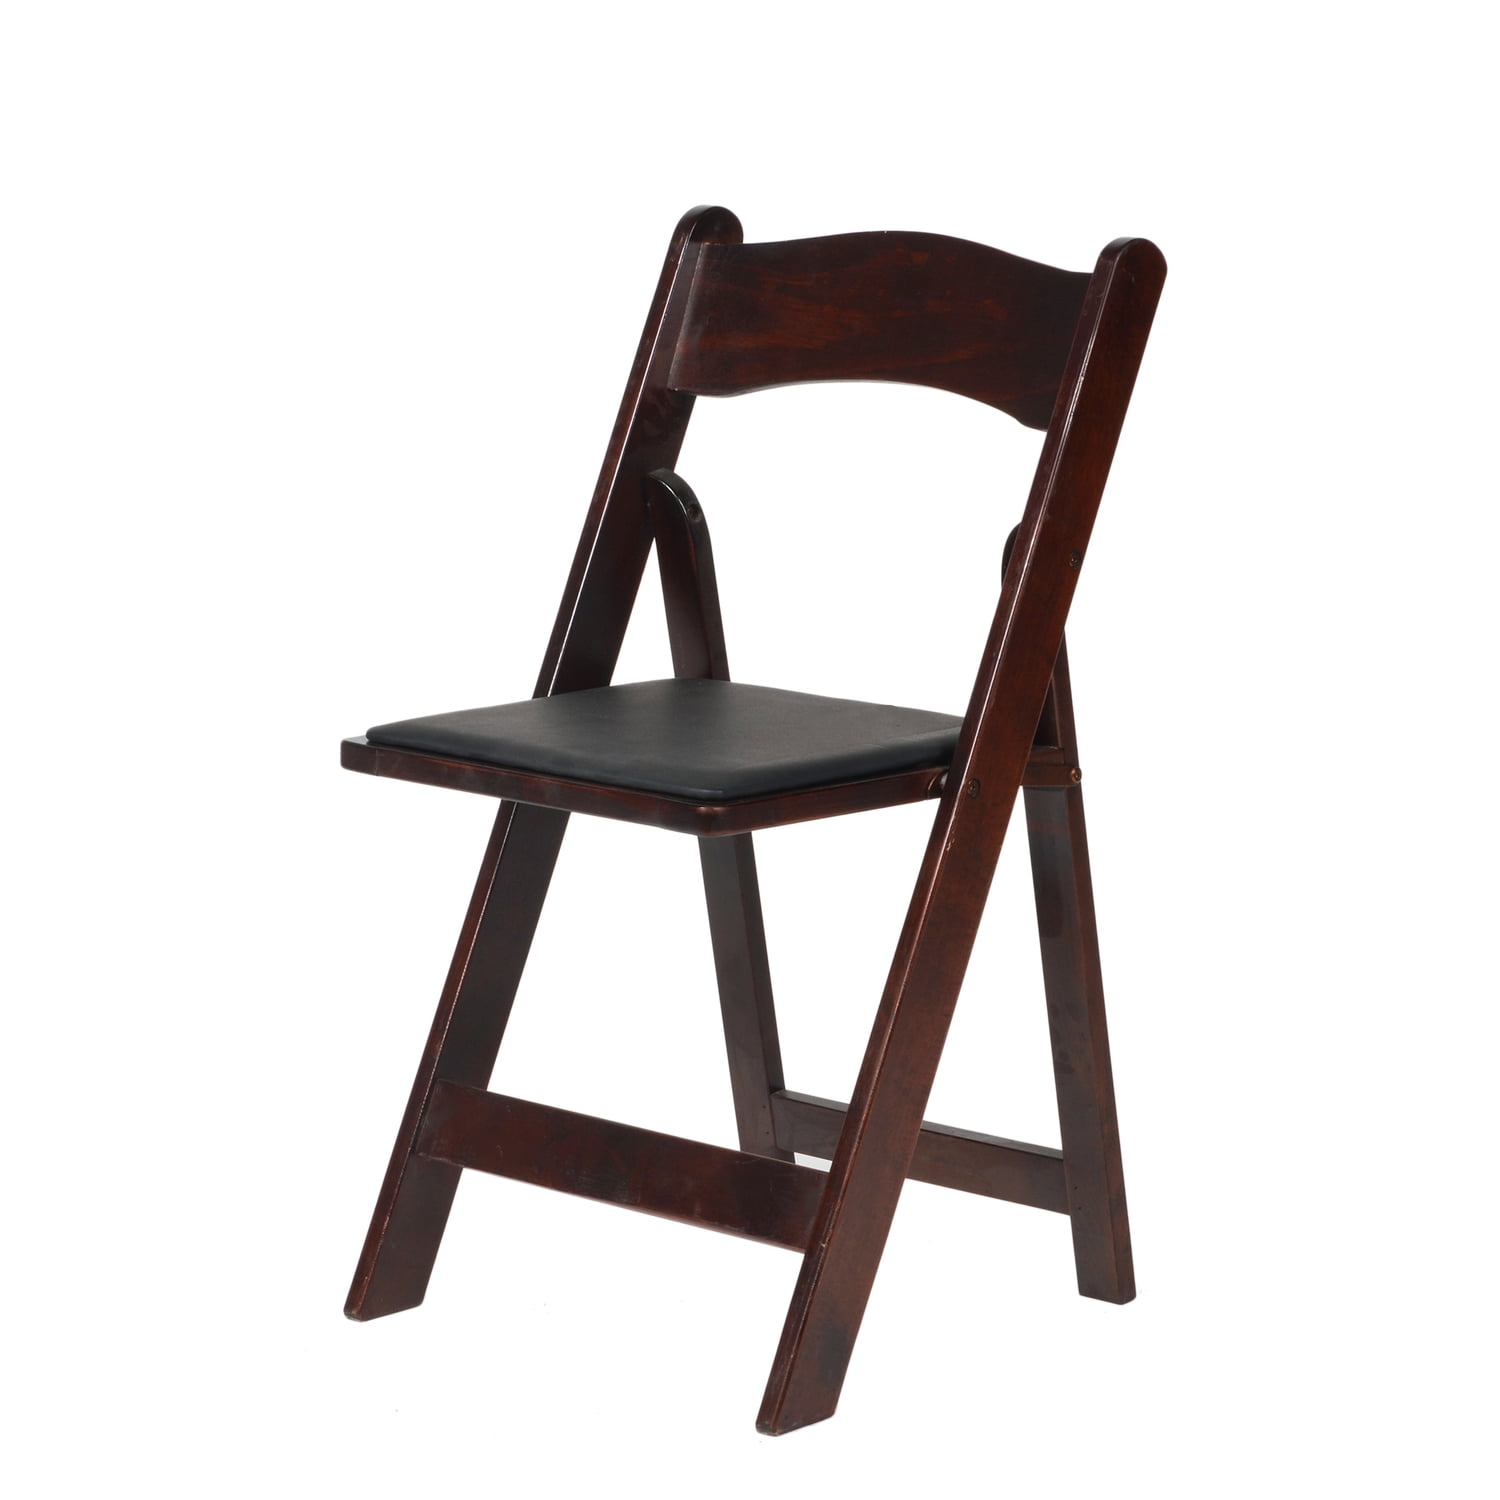 Picture of Commercial Seating Products A-101-RM-4 American Classic Red Mahogany Wood Folding Chair - 30.5 in. - Set of 4